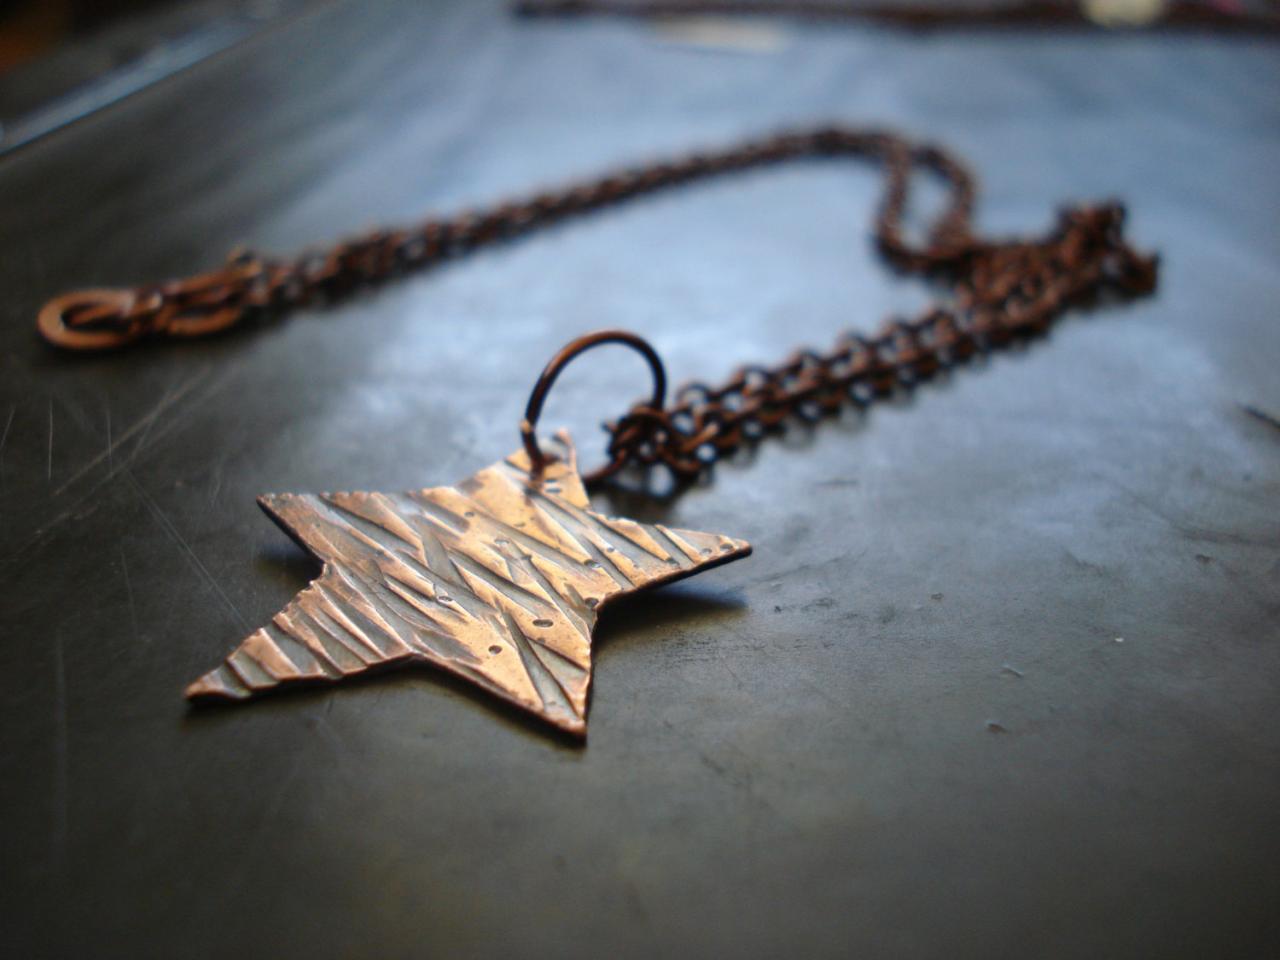 Star Necklace, Tiny Star Necklace, Shooting Star Necklace, Hammered Copper Star Necklace, Ebsjewels